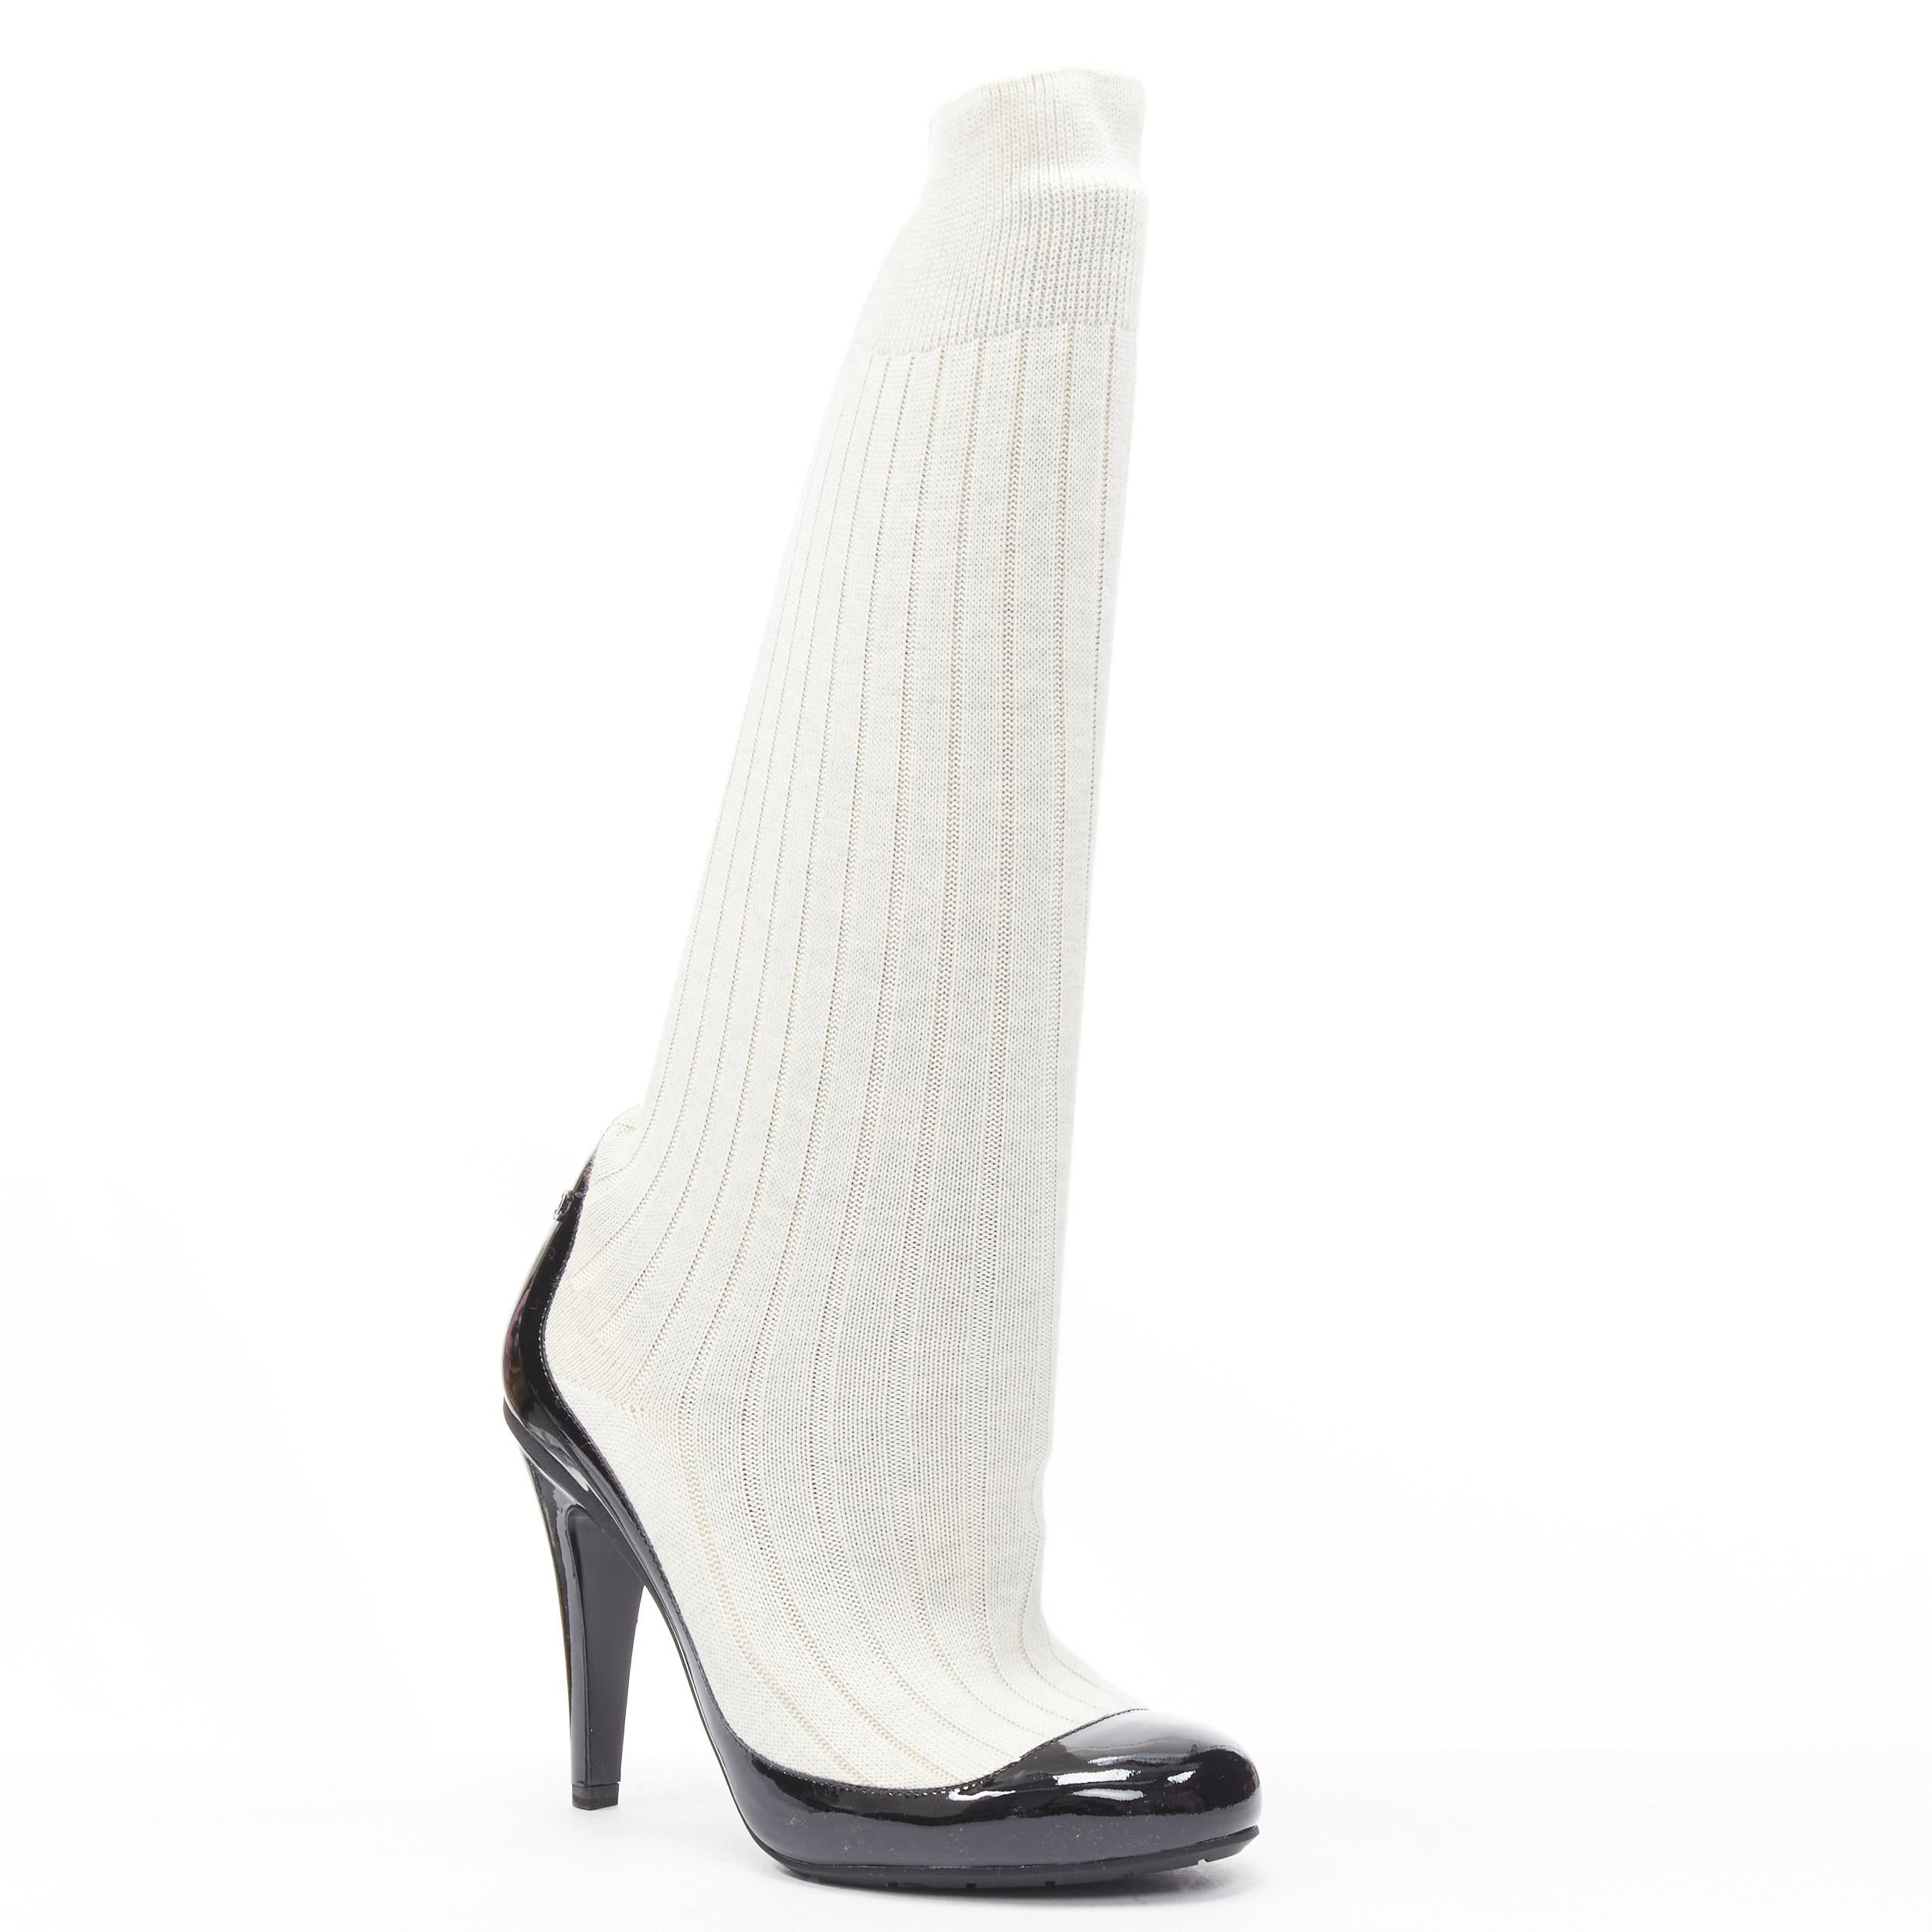 new CHANEL 2014 Runway beige ribbed sock black patent CC logo high heel EU37.5 Reference: MELK/A00223
 Brand: Chanel 
Designer: Karl Lagerfeld 
Collection: 2014 Runway 
Material: Patent Leather 
Color: Beige 
Pattern: Solid 
Extra Detail: Ribbed